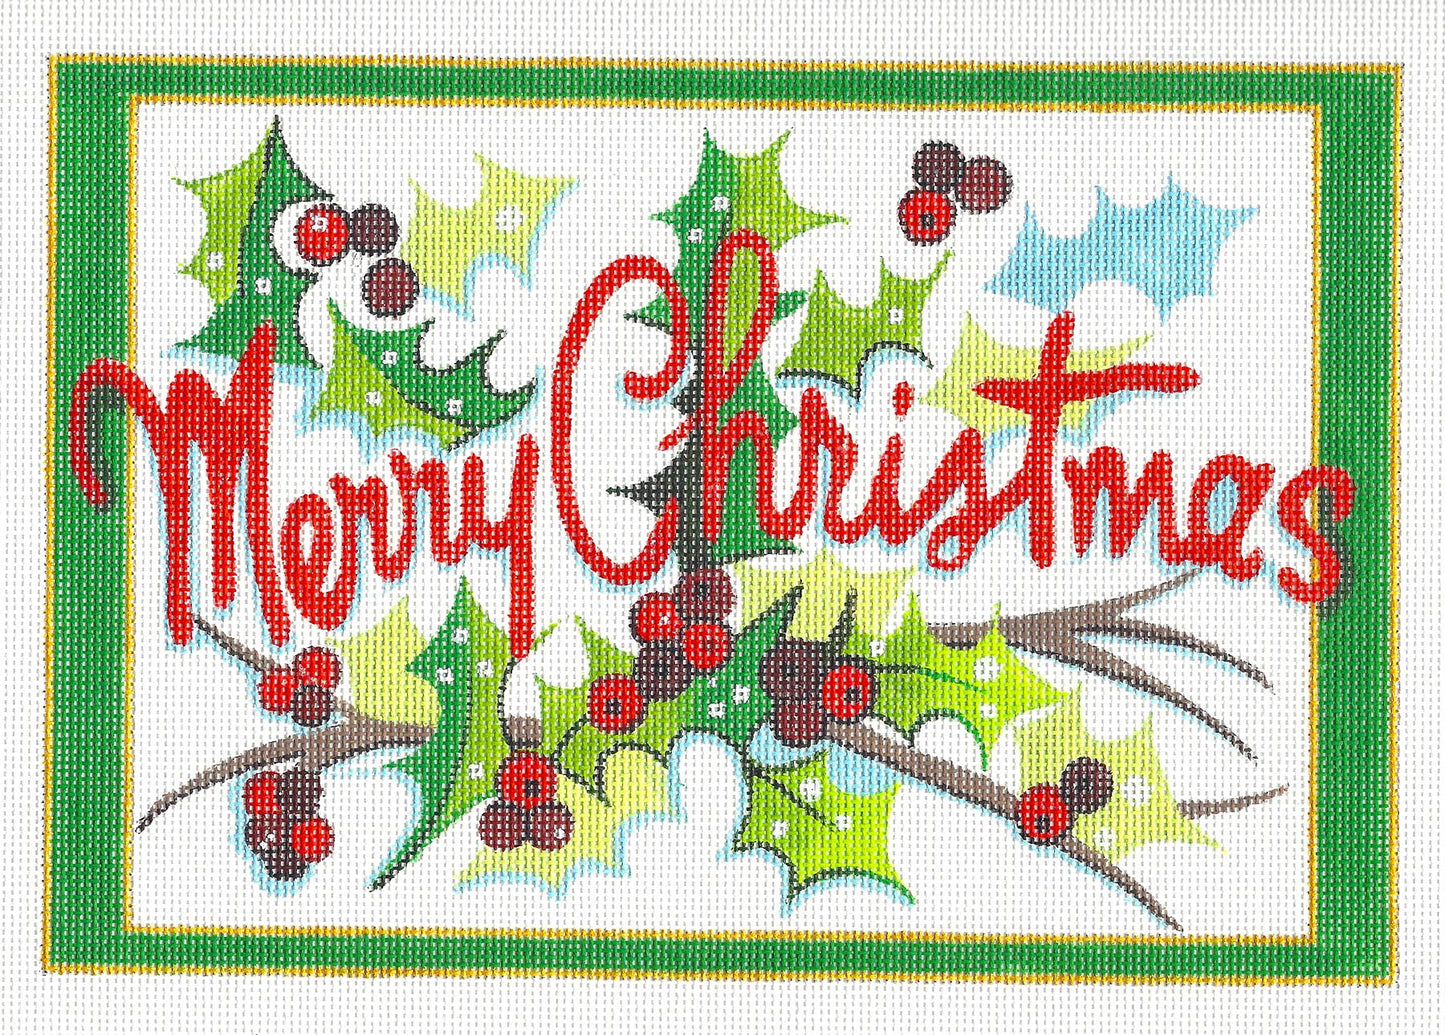 Christmas ~ MERRY CHRISTMAS Holly & Berries handpainted LG. Needlepoint Canvas by Raymond Crawford